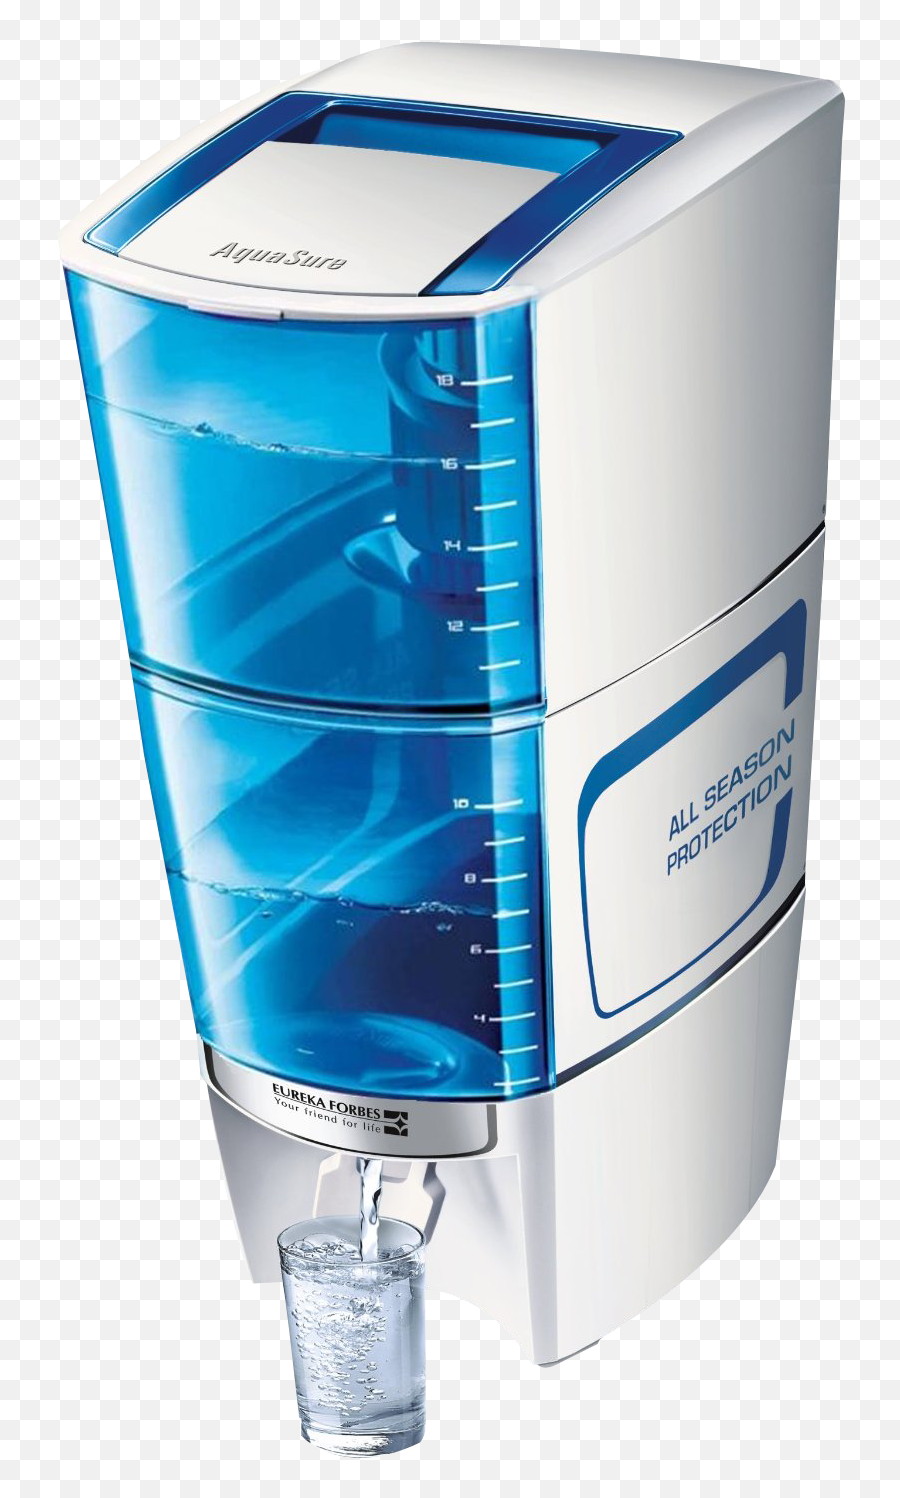 Water Purifier With Glass Png Image - Pngpix Eureka Forbes Water Purifier Amrit,Glass Of Water Png